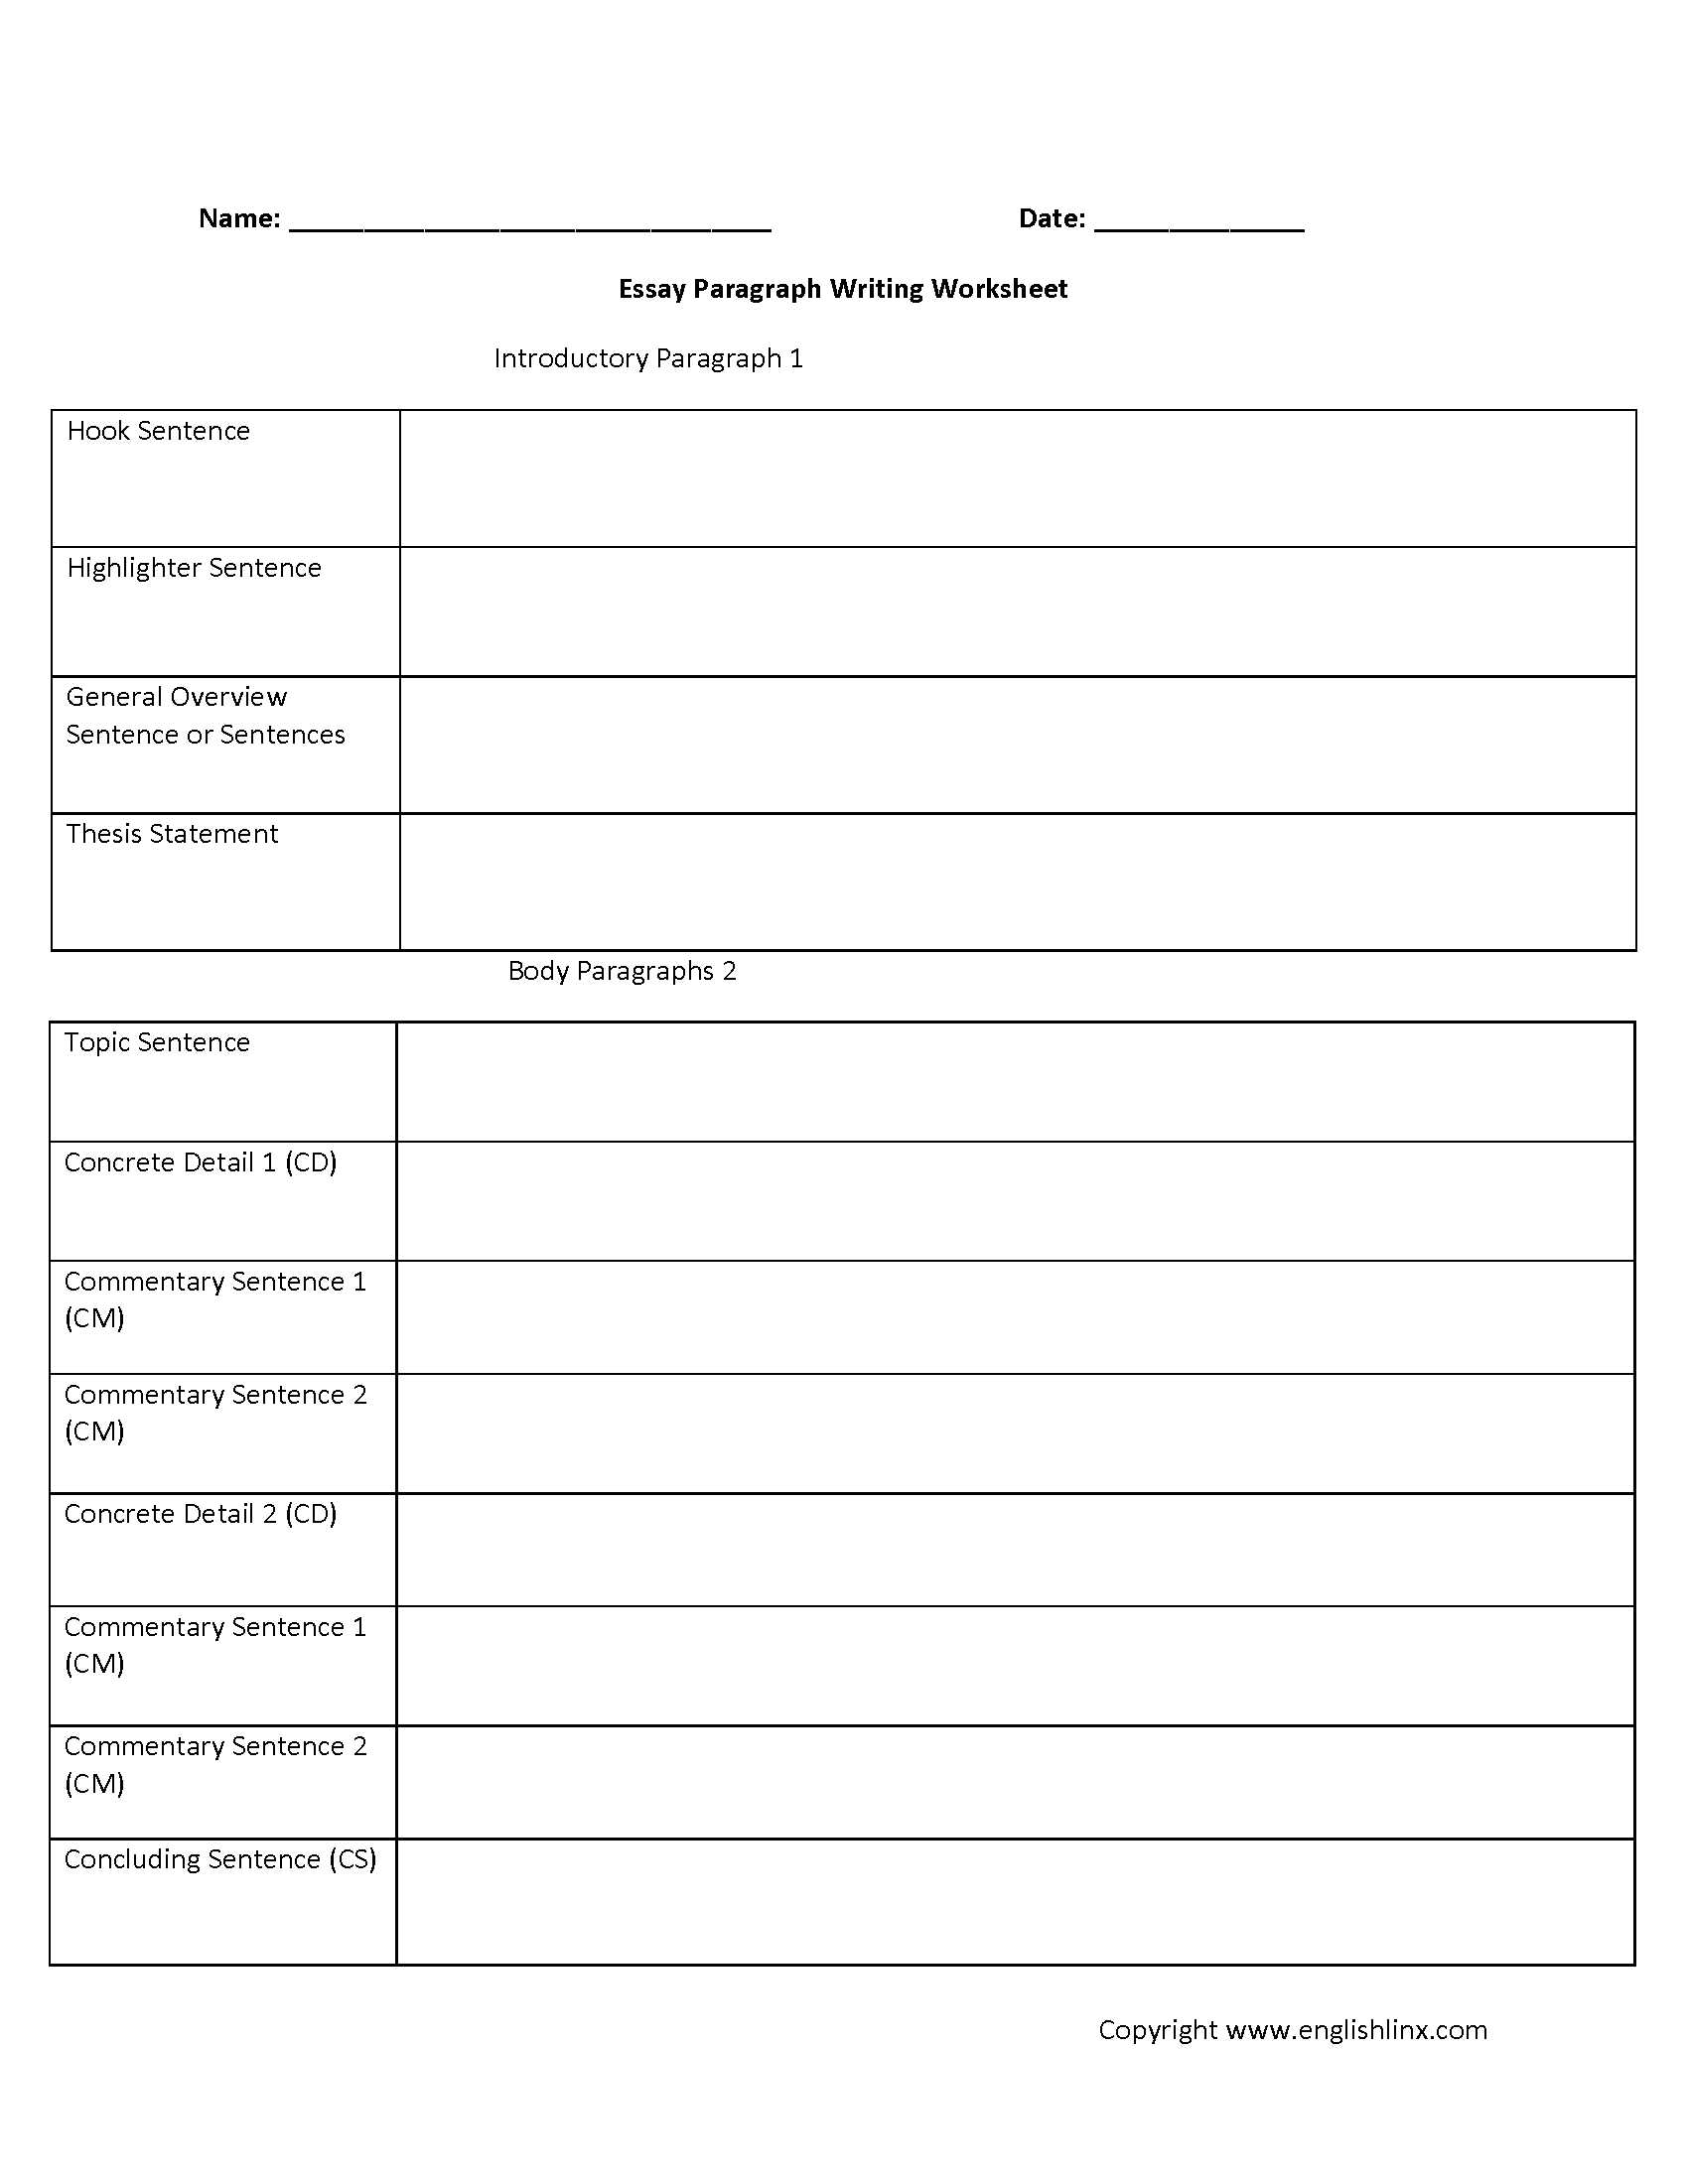 Paragraph Editing Worksheets with Teaching the Five Paragraph Essay Writing Worksheets Essay Writing